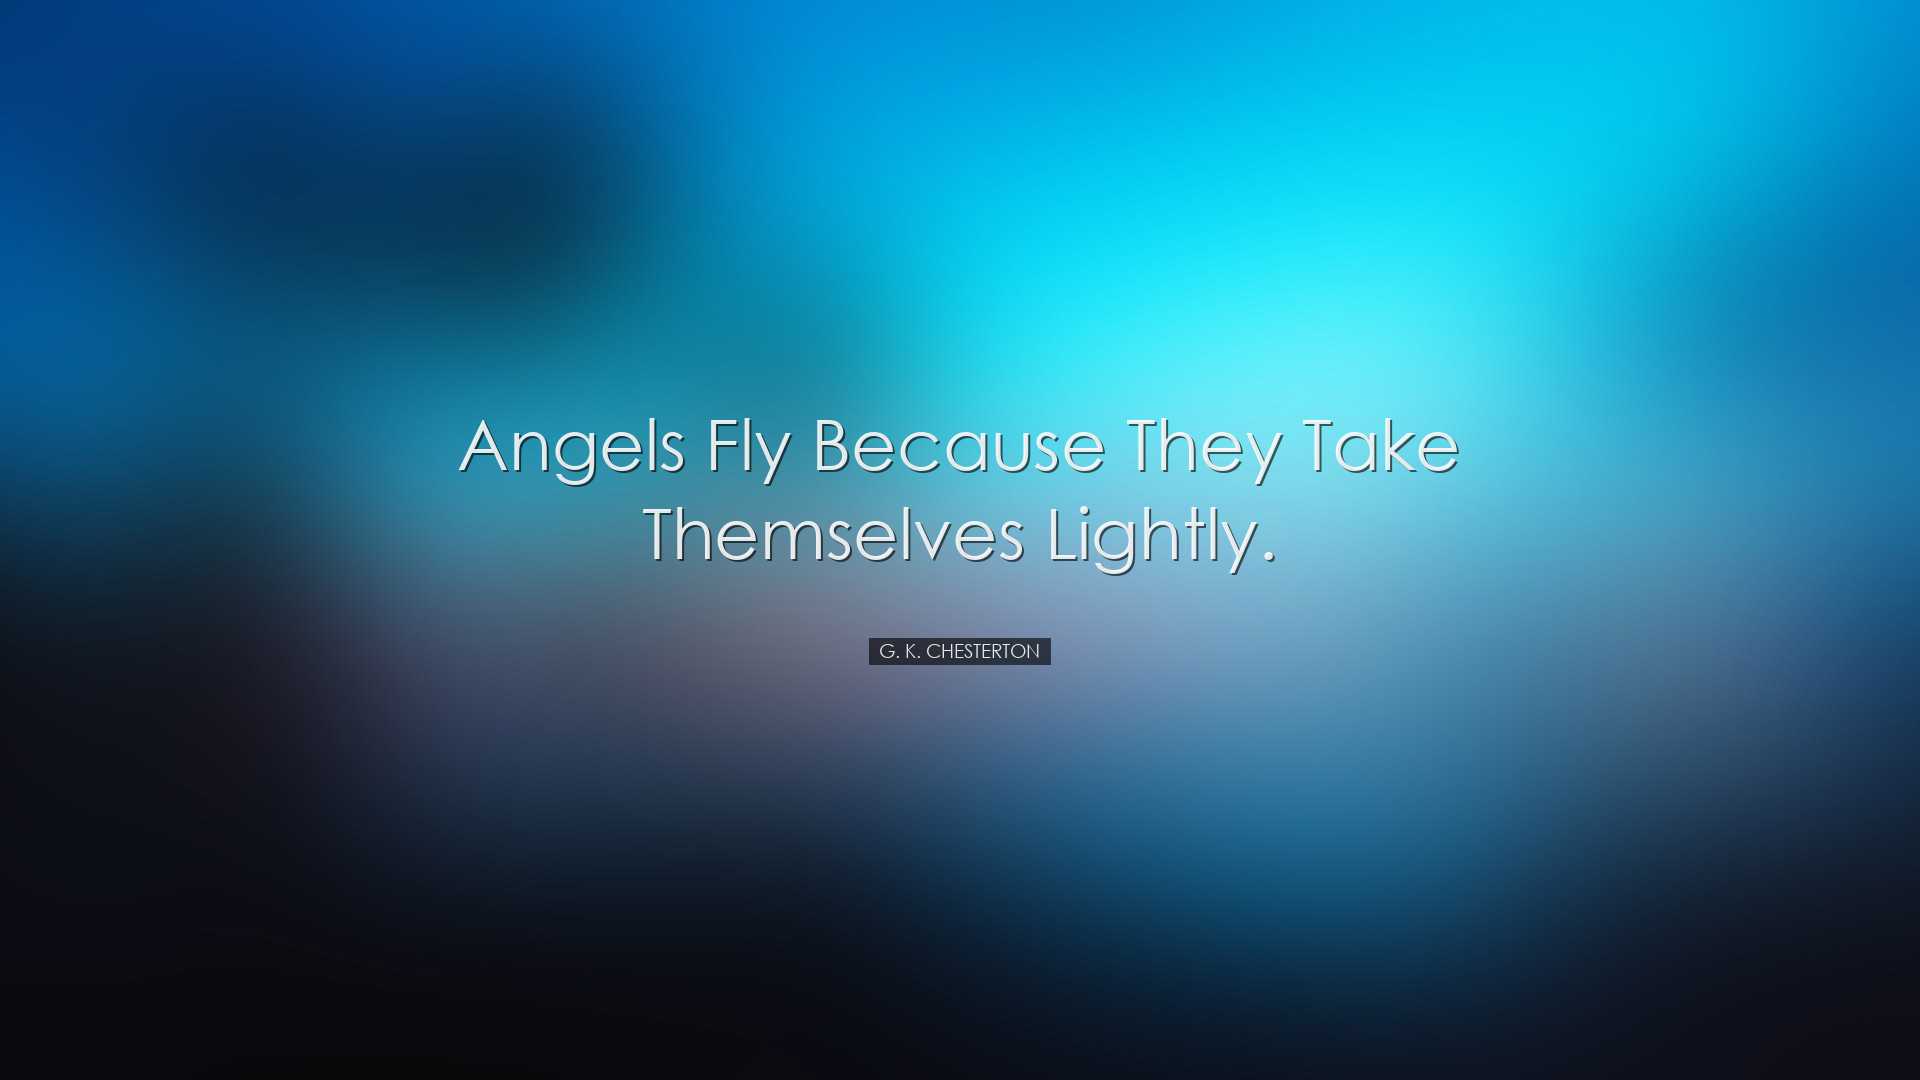 Angels fly because they take themselves lightly. - G. K. Chesterto